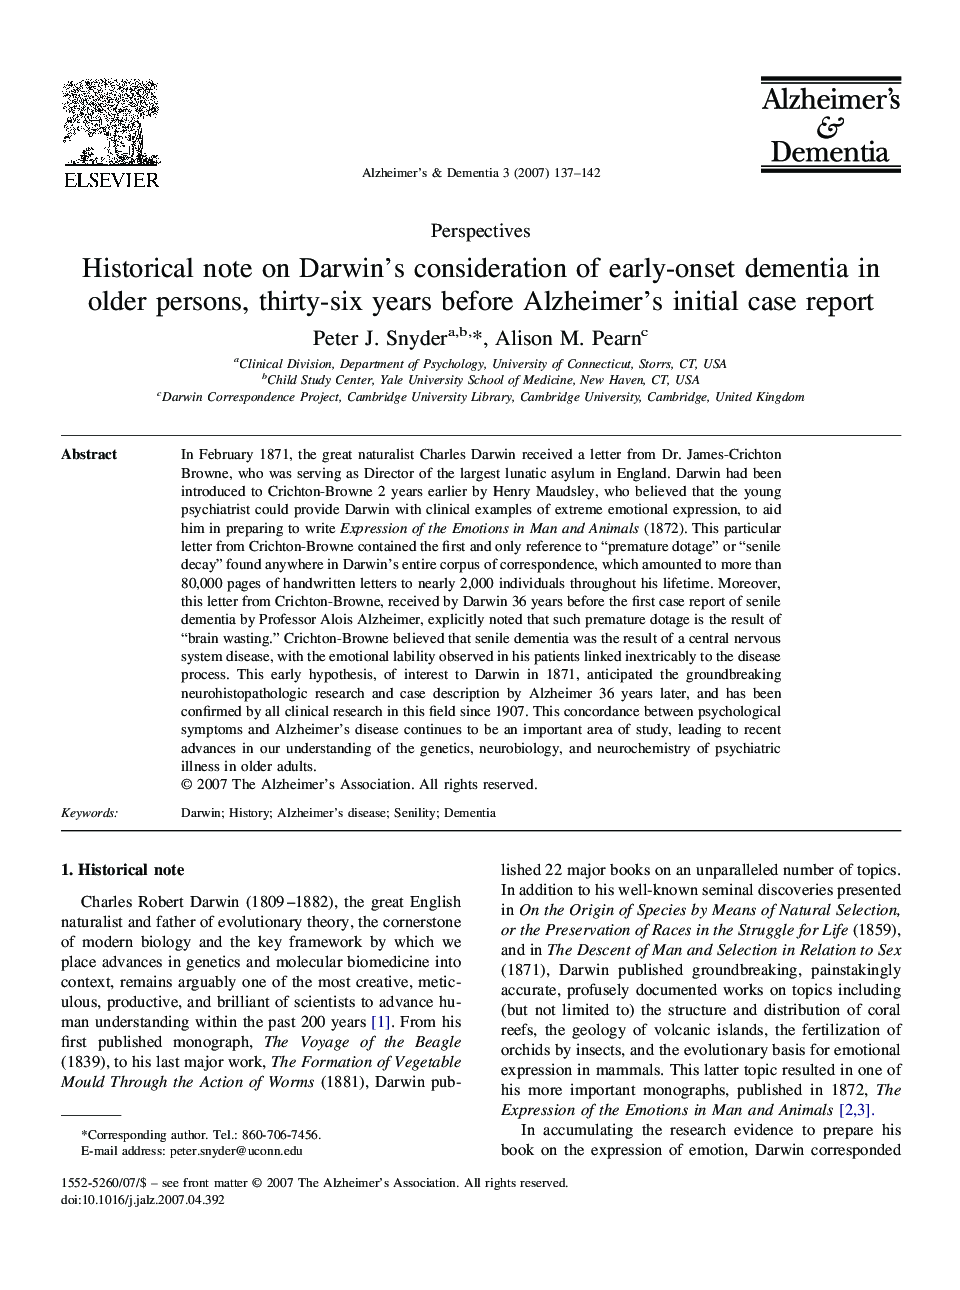 PerspectiveHistorical note on Darwin's consideration of early-onset dementia in older persons, thirty-six years before Alzheimer's initial case report